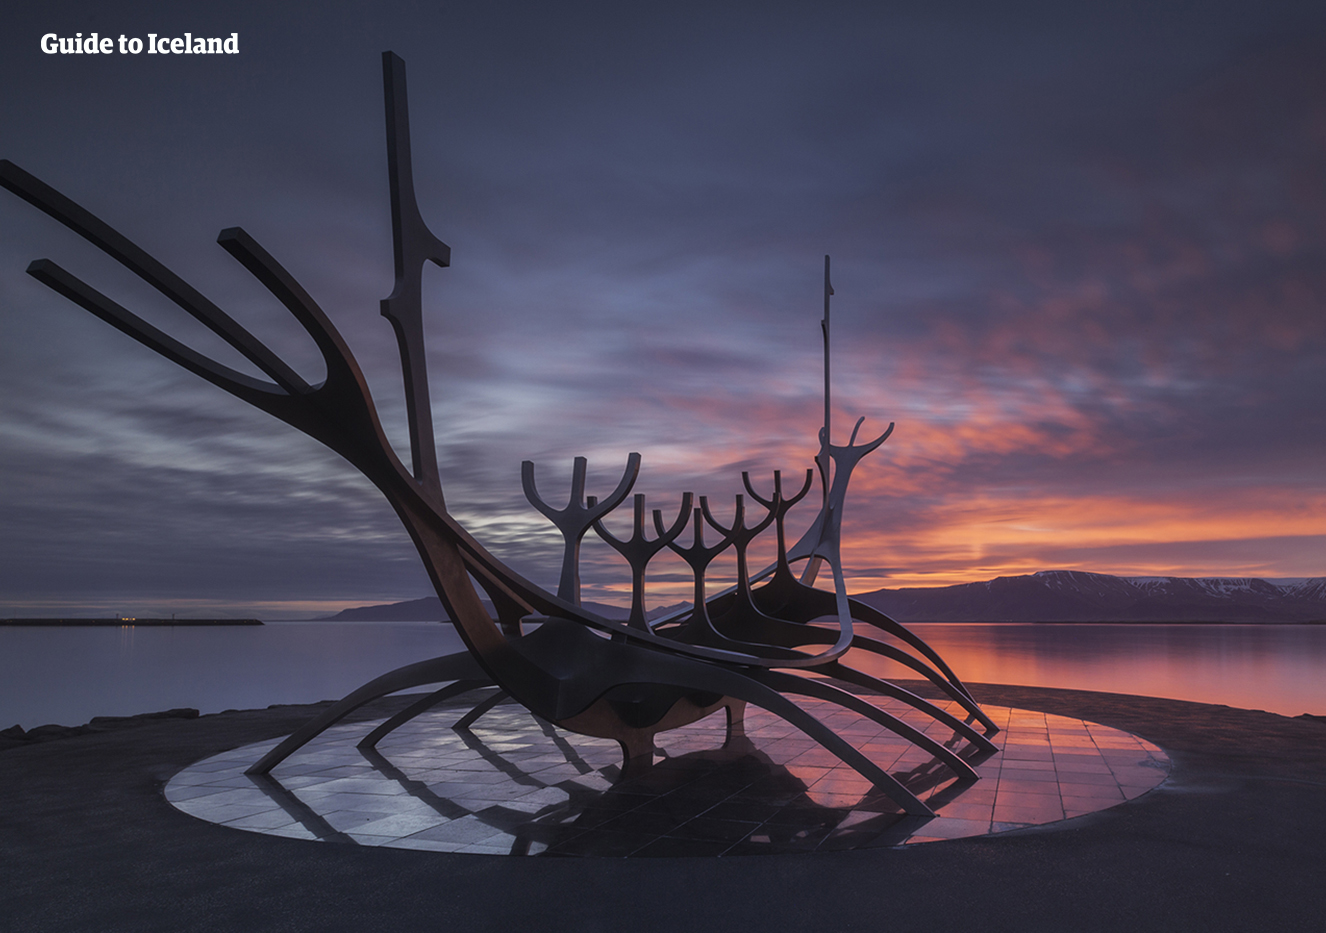 The Sun Voyager represents Iceland's spirit of adventure.